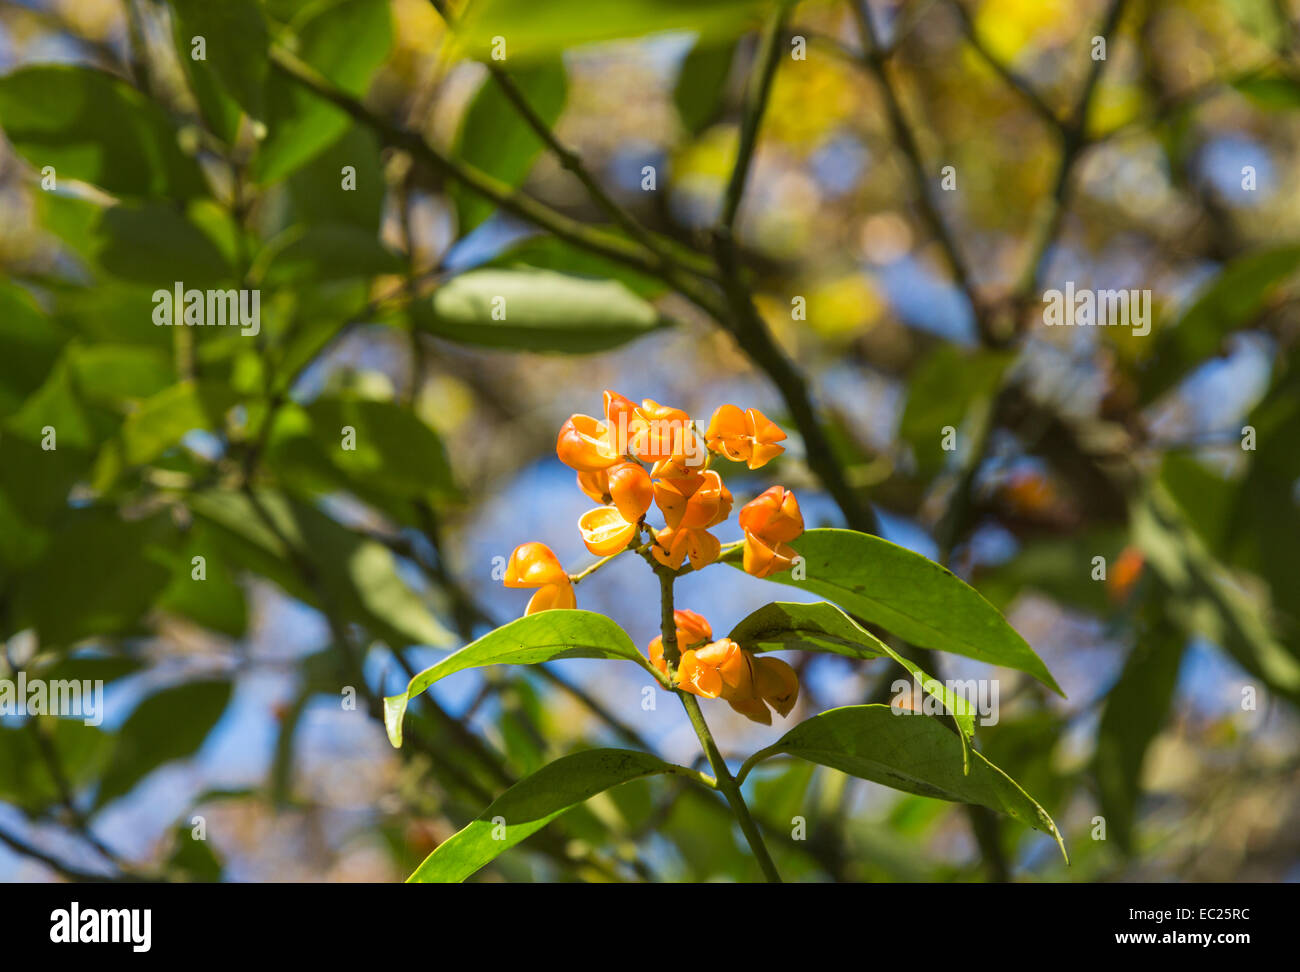 Close up view of colourful orange to yellow fruits of Euonymus myrianthus, a rare type of spindle tree native to western China, fruiting in winter Stock Photo